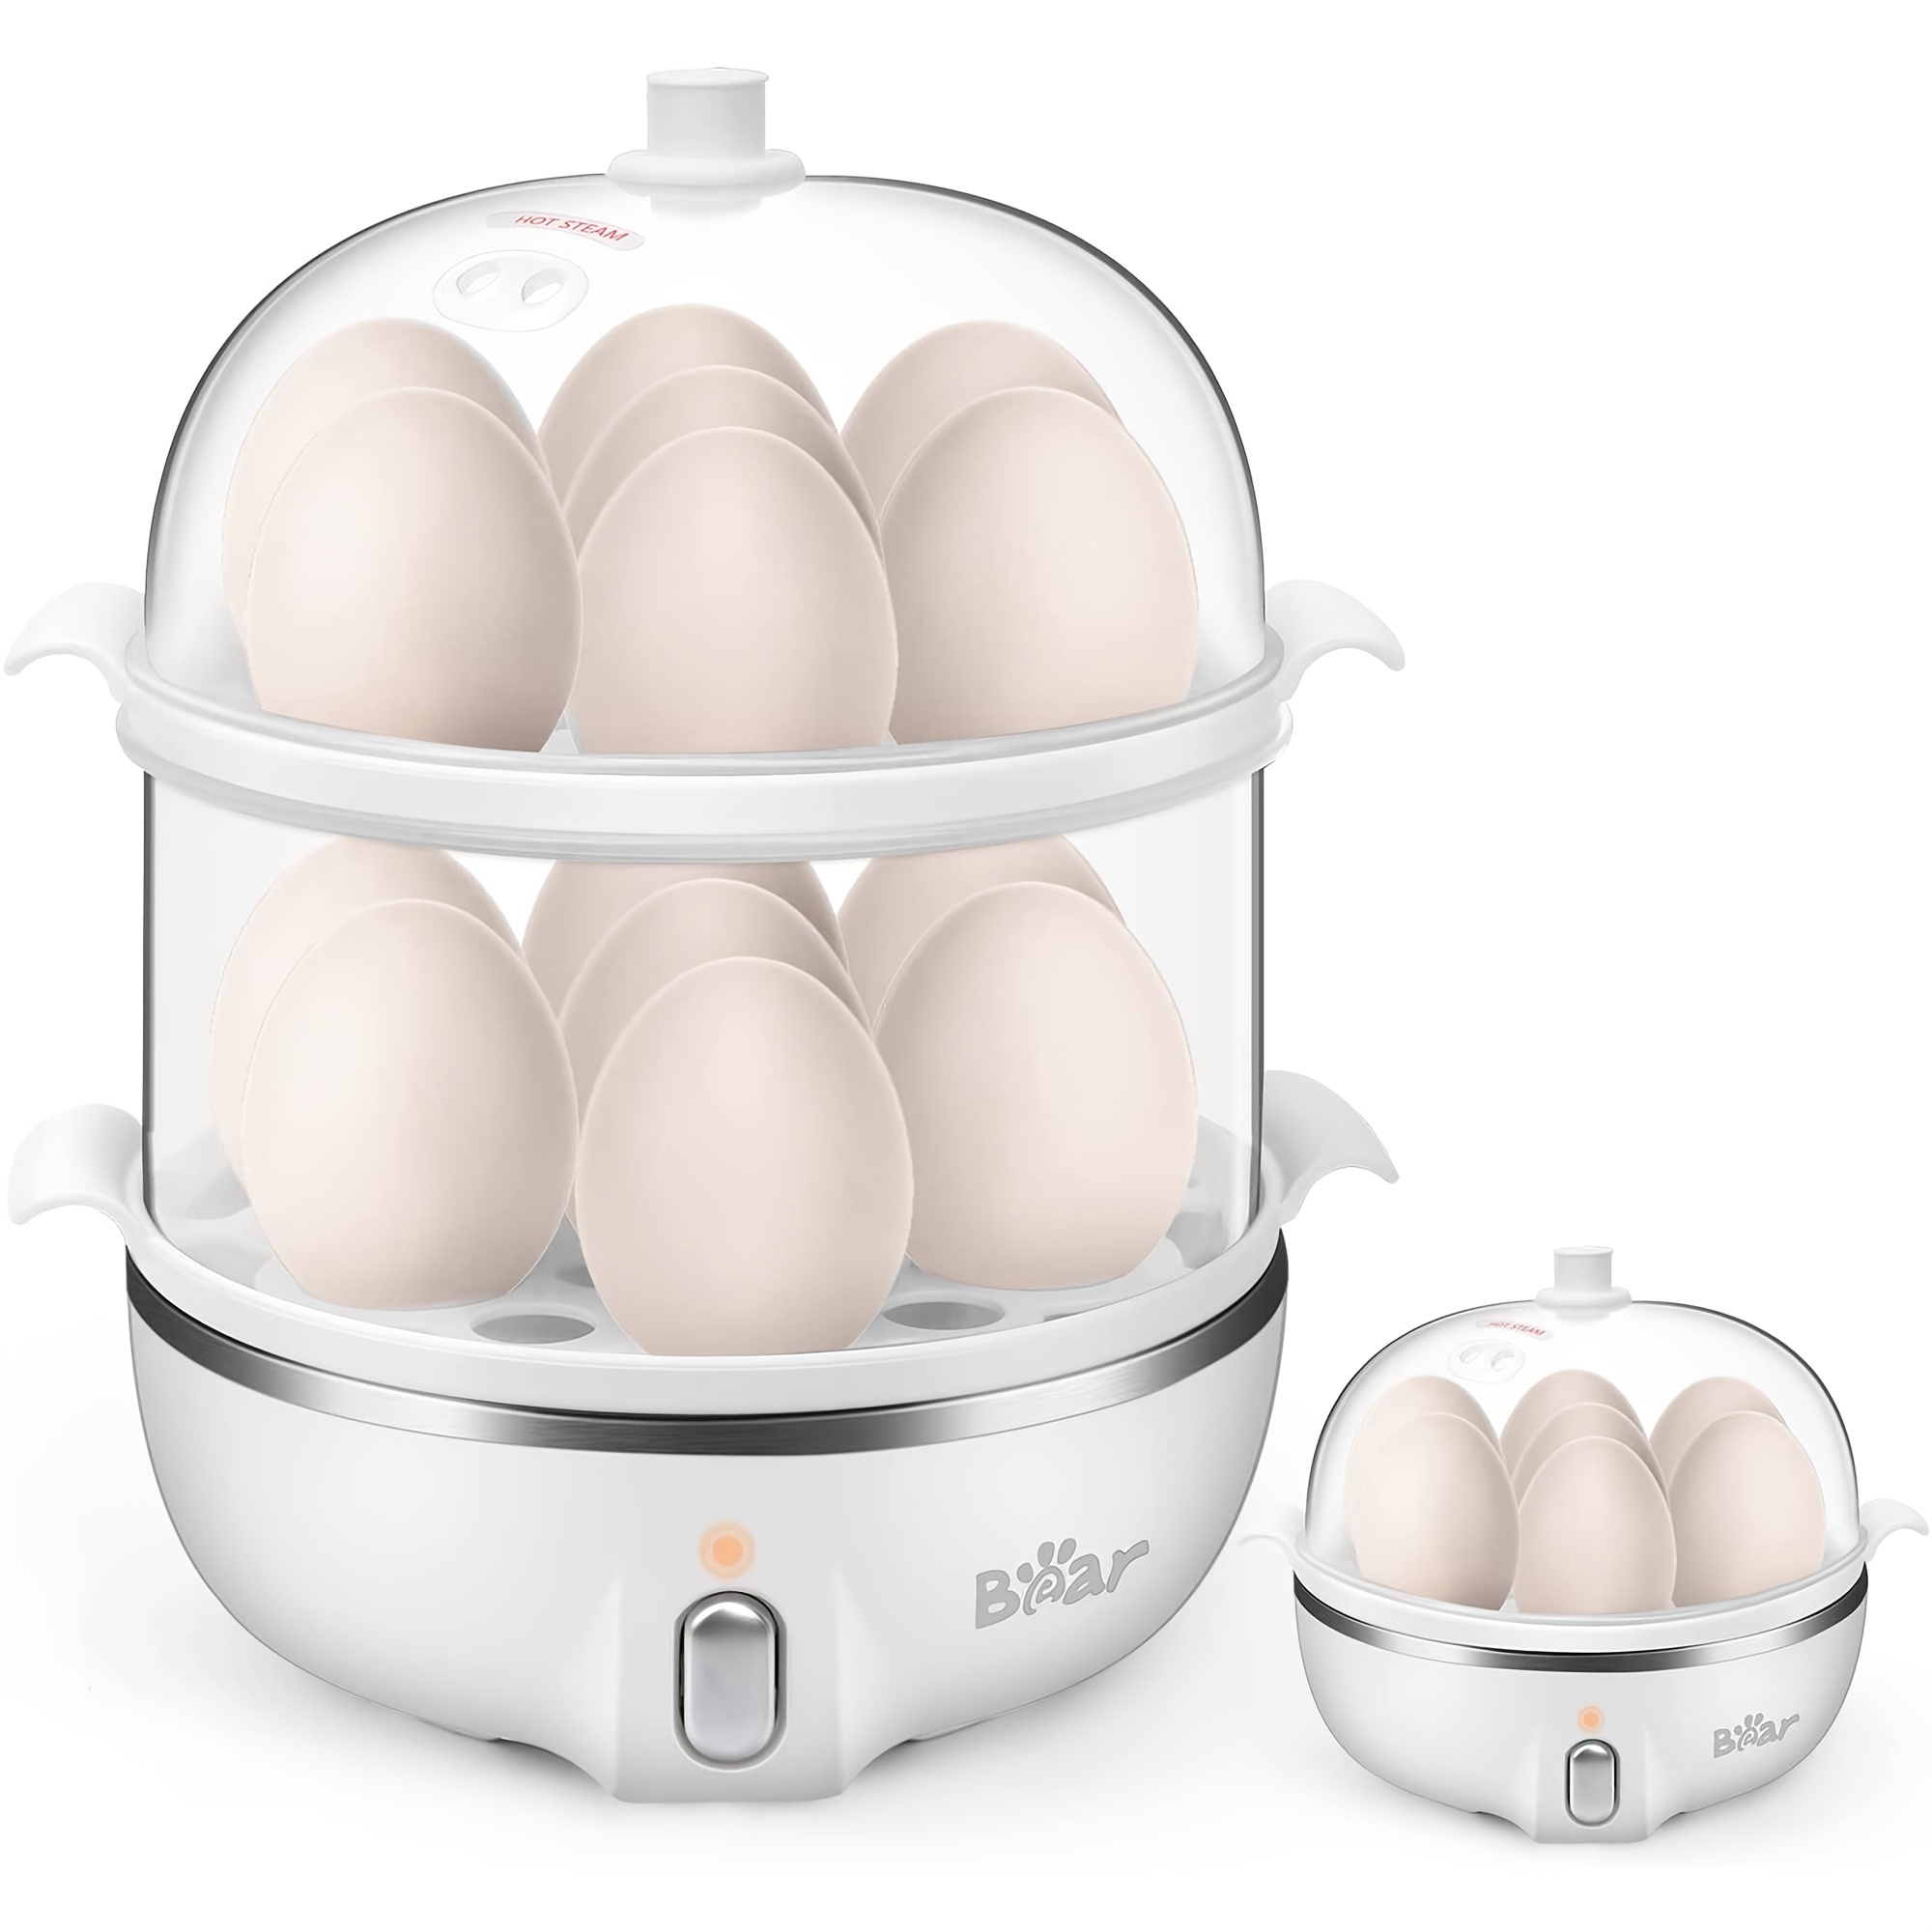 Rapid Electric Egg Cooker - Cooks 14 Eggs At Once, Perfect For